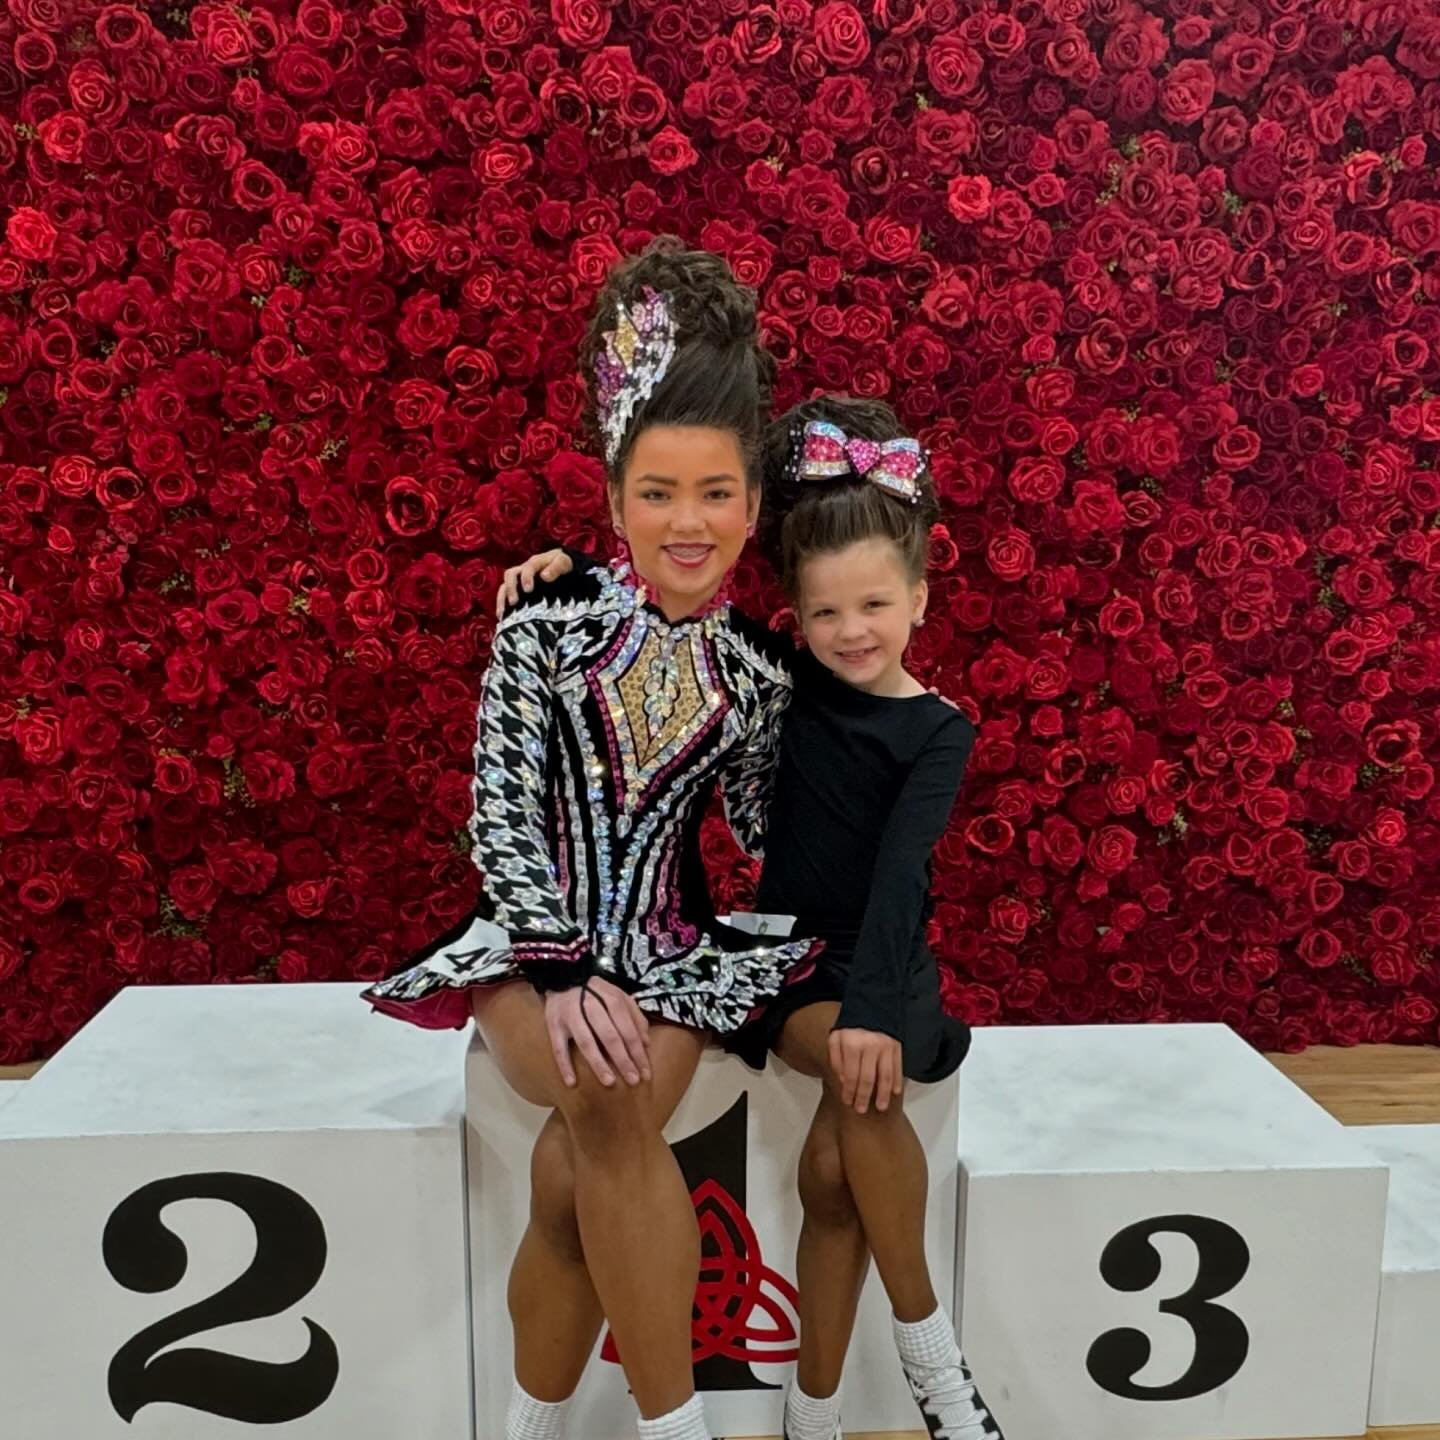 Lots of Feis fun this weekend at the @wisconsinspringfeis !! Super proud of all dancers, Grades through Open Champ! Keep up the hard work! NANs is right around the corner! 👑☘️👑 

#omgirishdance #idmfeisfun